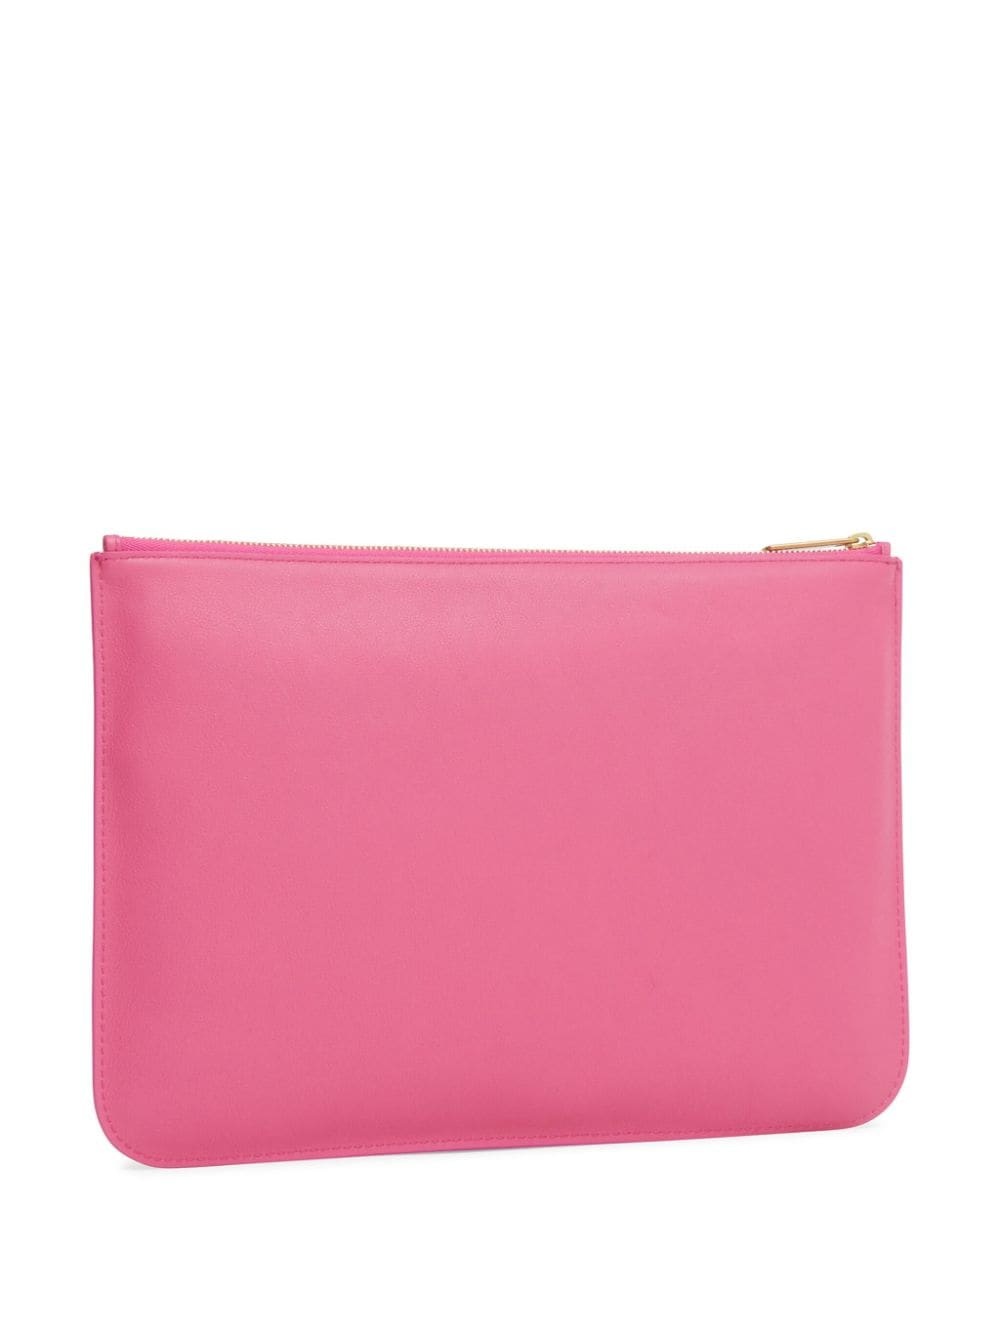 Everyday leather zipped clutch - 2